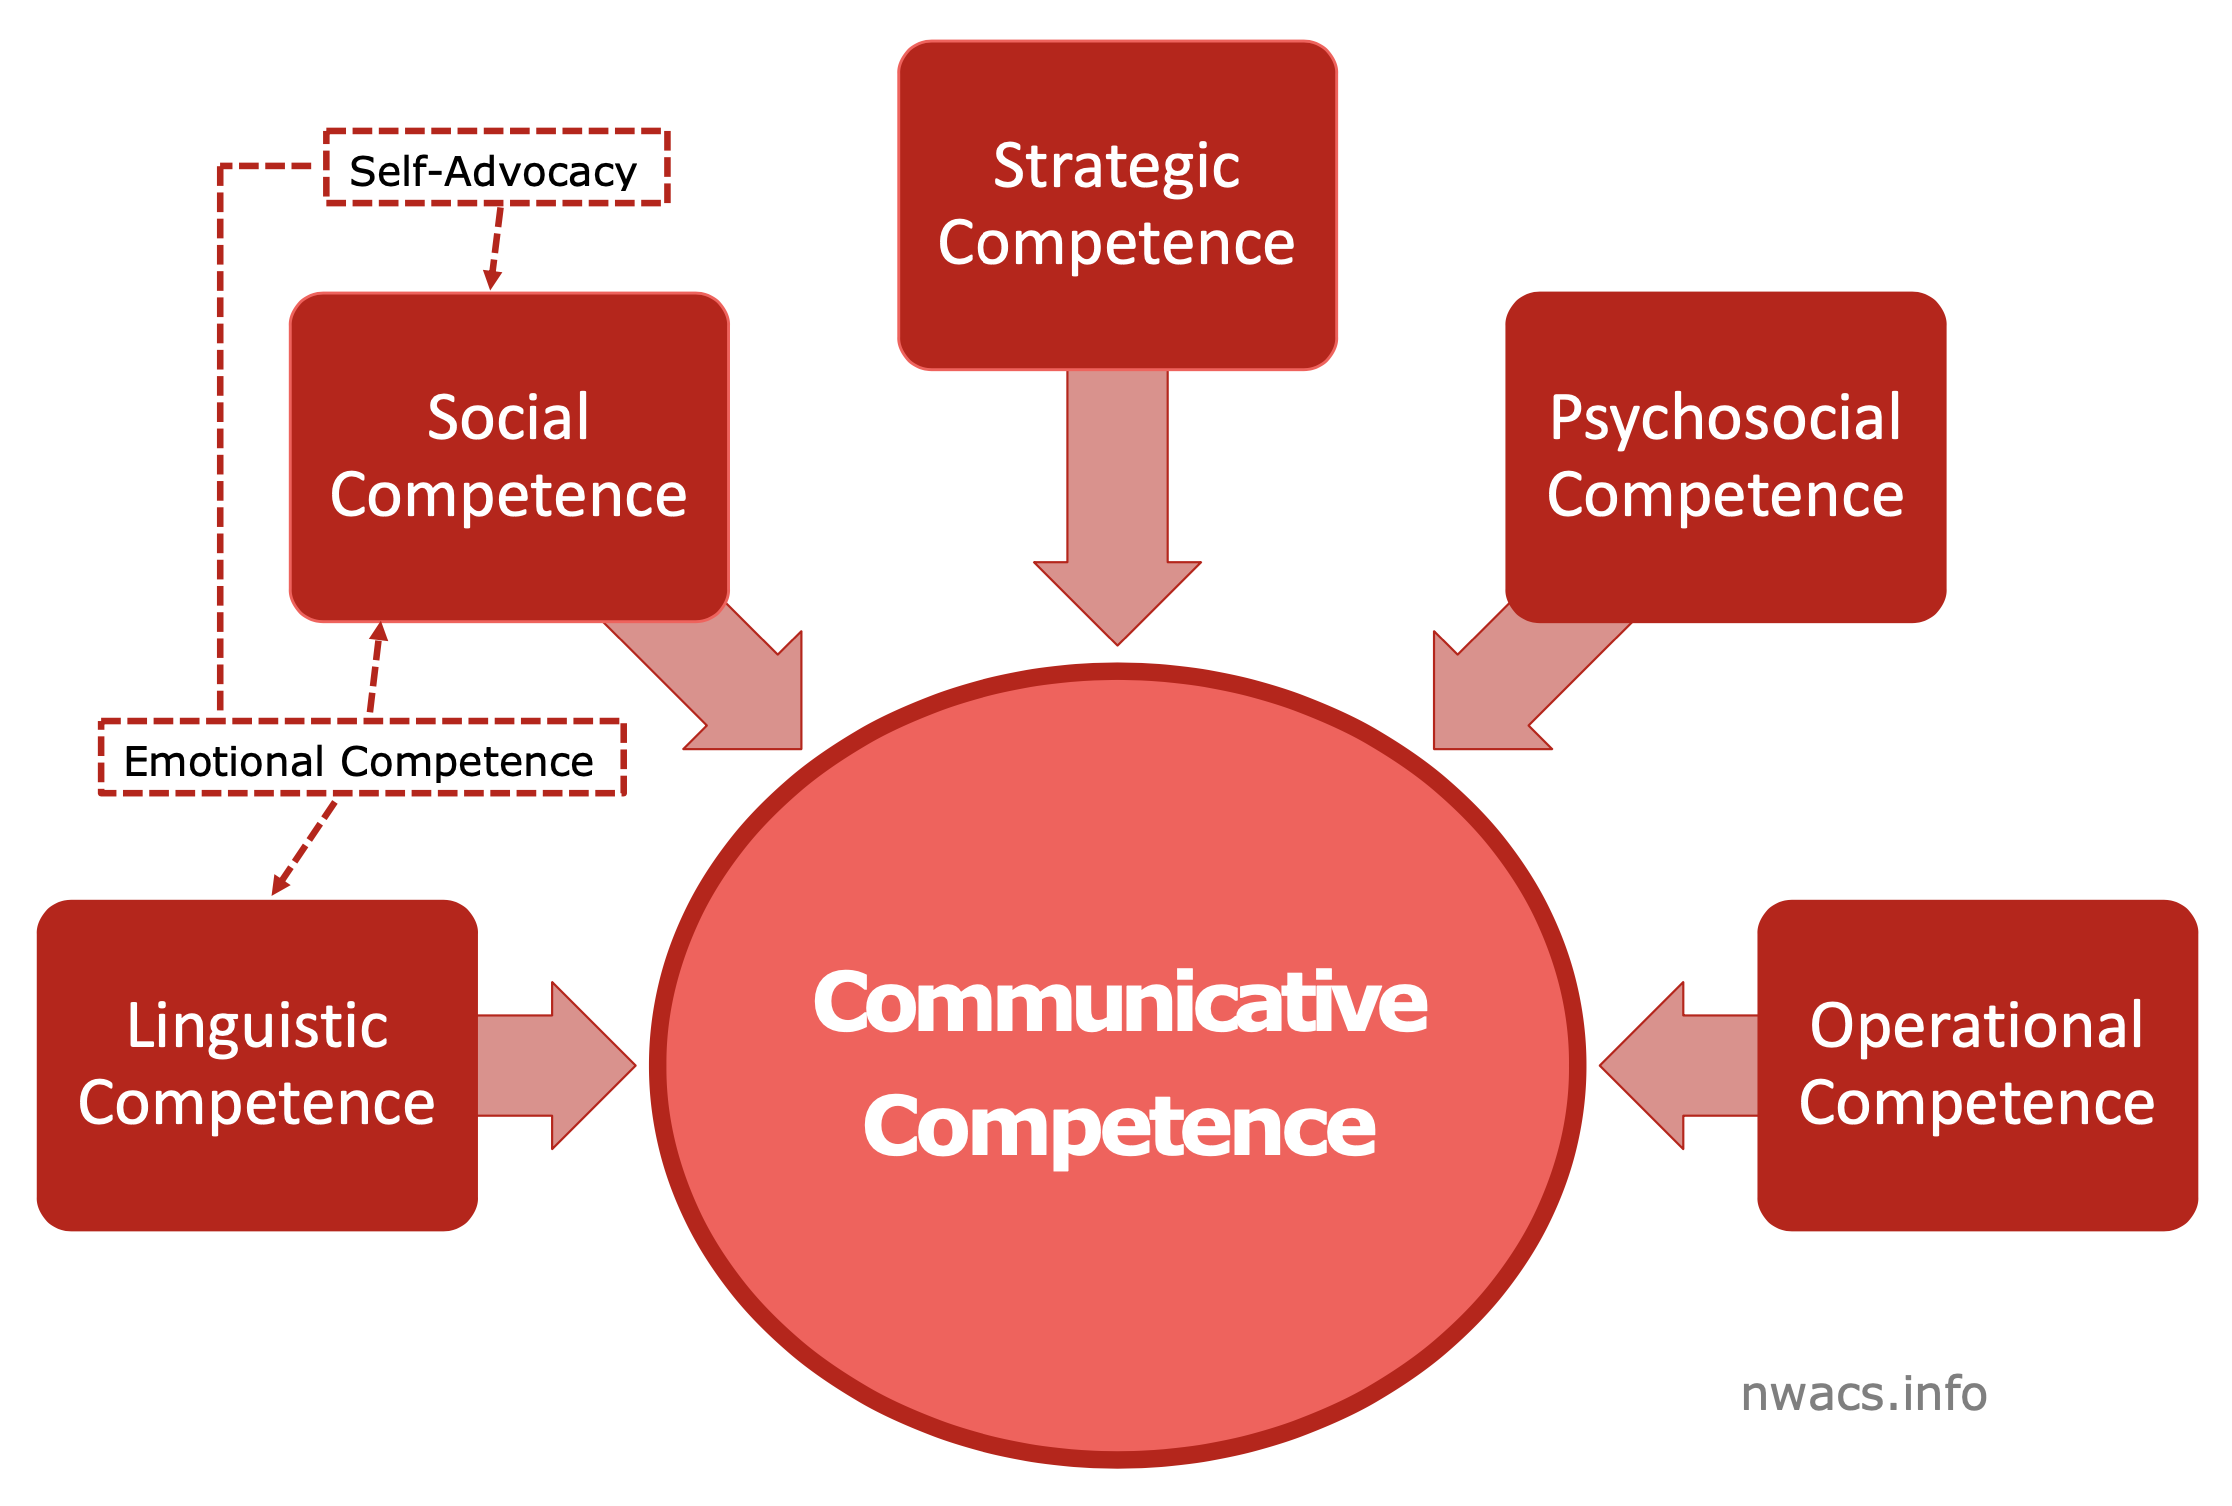 explain the graphic presentation entitled communicative competence and multiliteracies